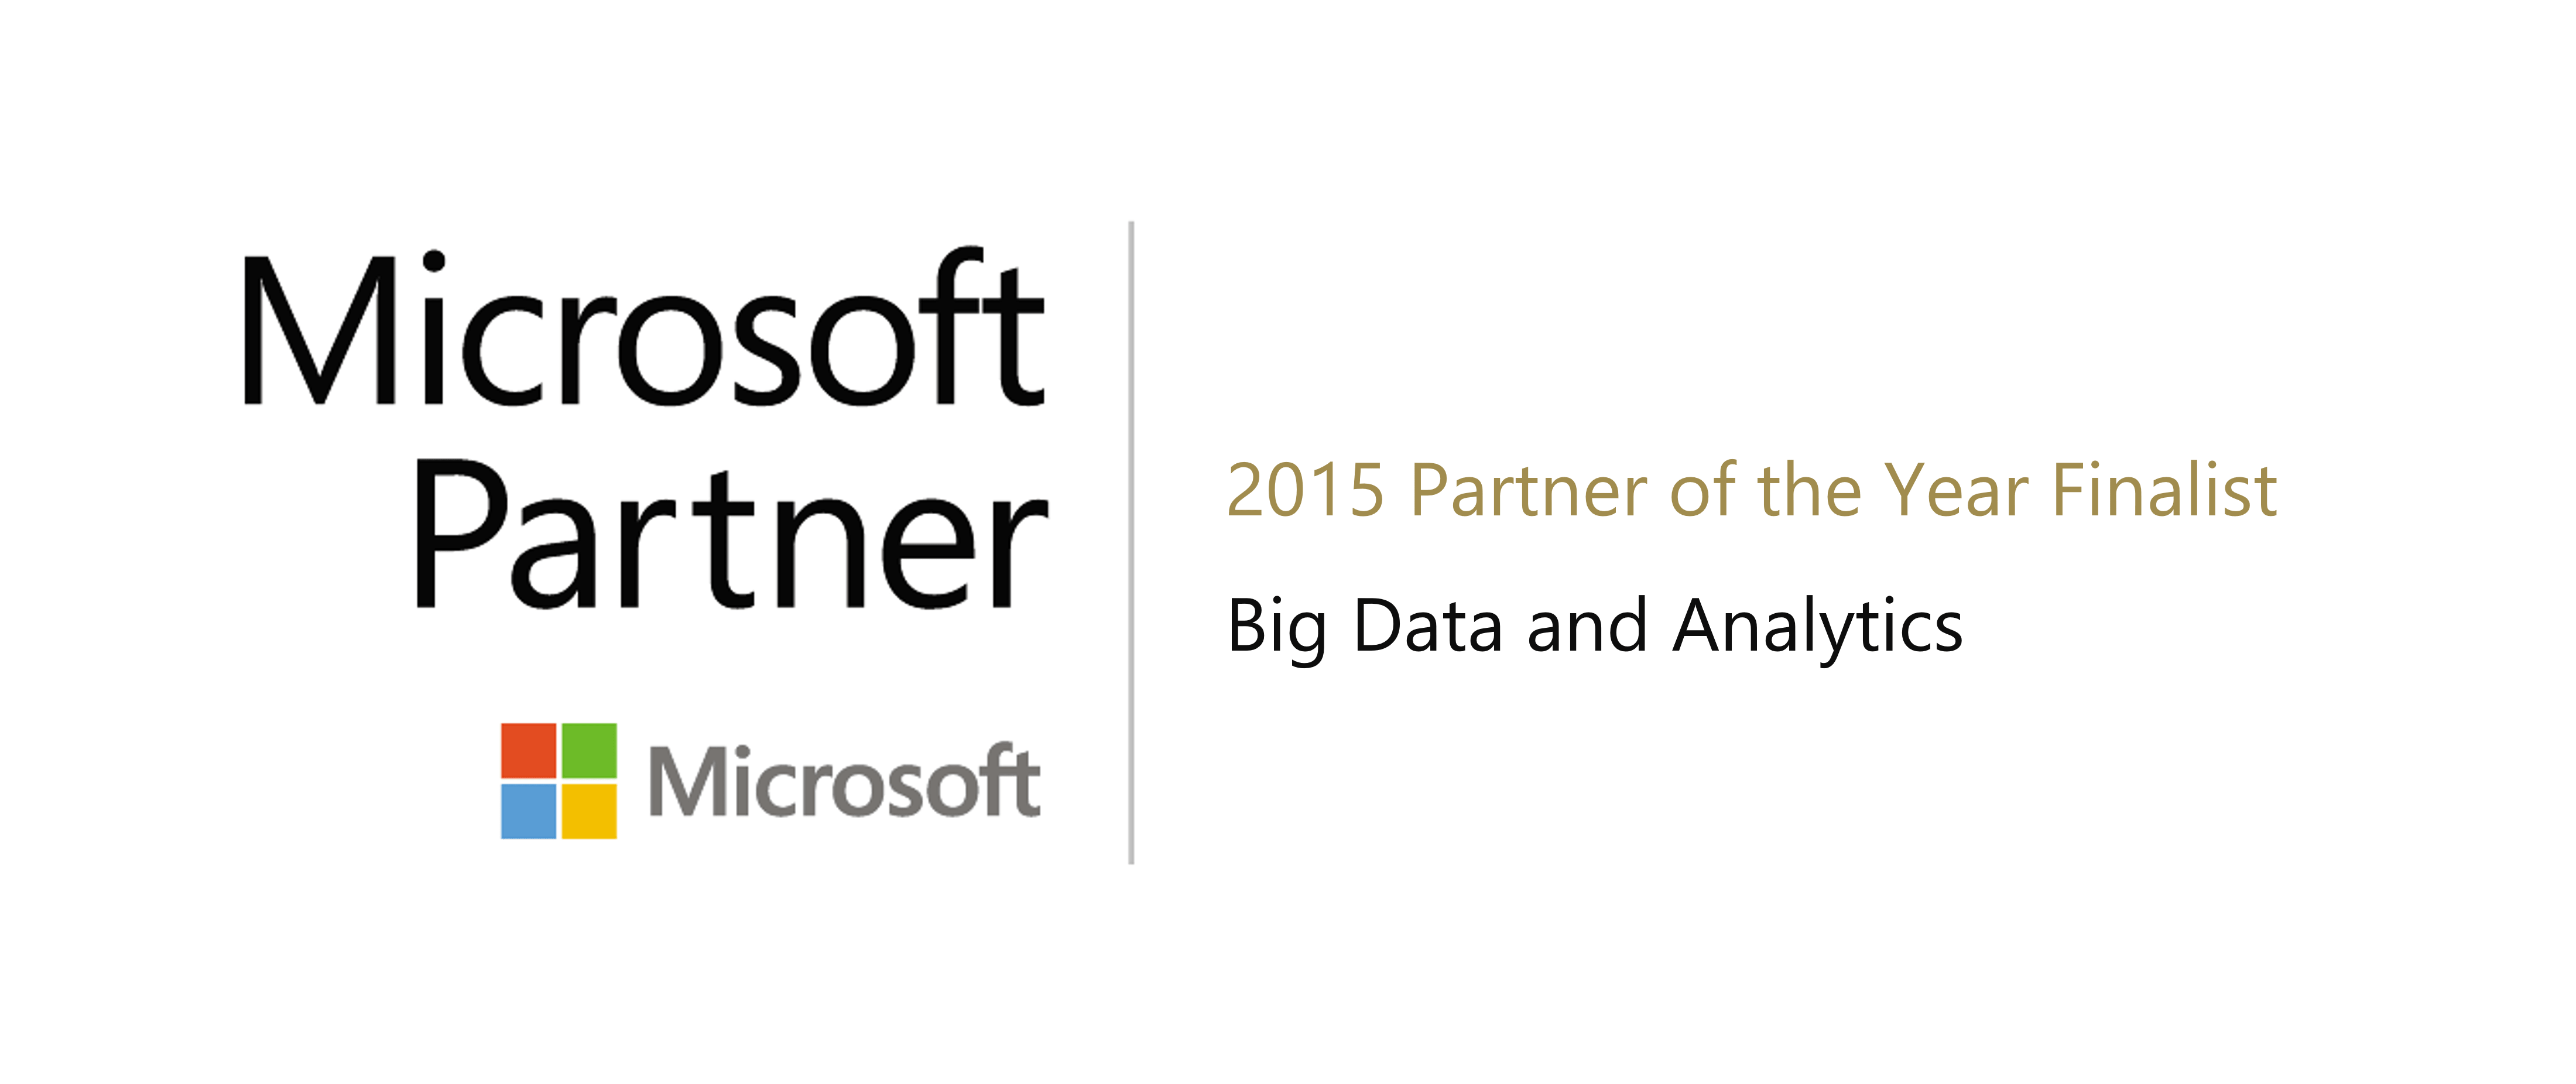 MSFT 2015 Partner of the Year Finalist for Big Data and Analytics